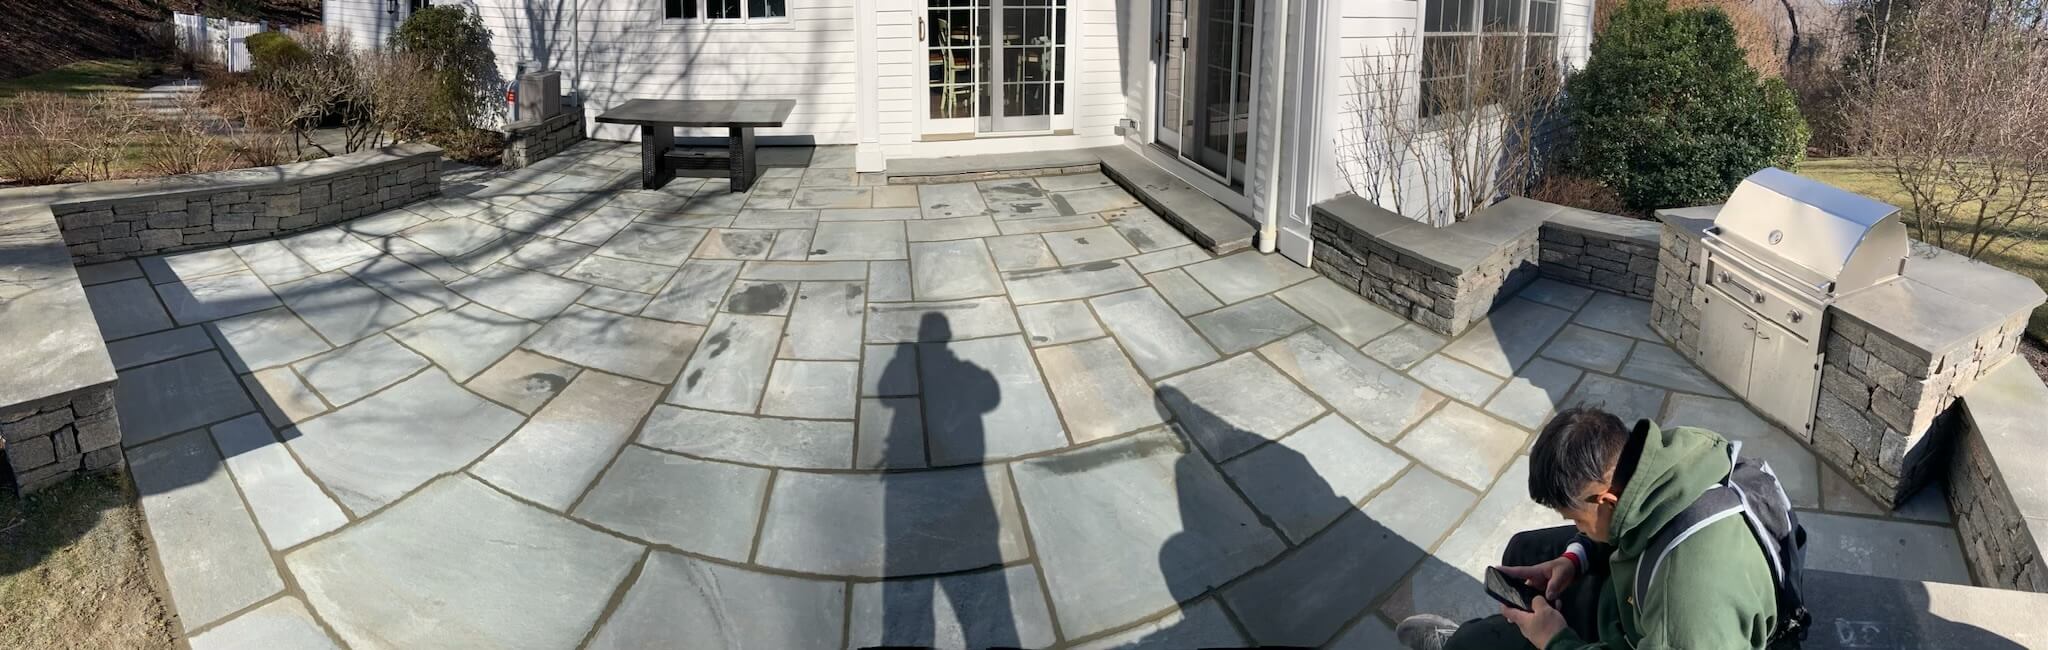 Panoramic view of a stone patio with outdoor furniture, retaining walls, and a person's shadow visible on the ground.